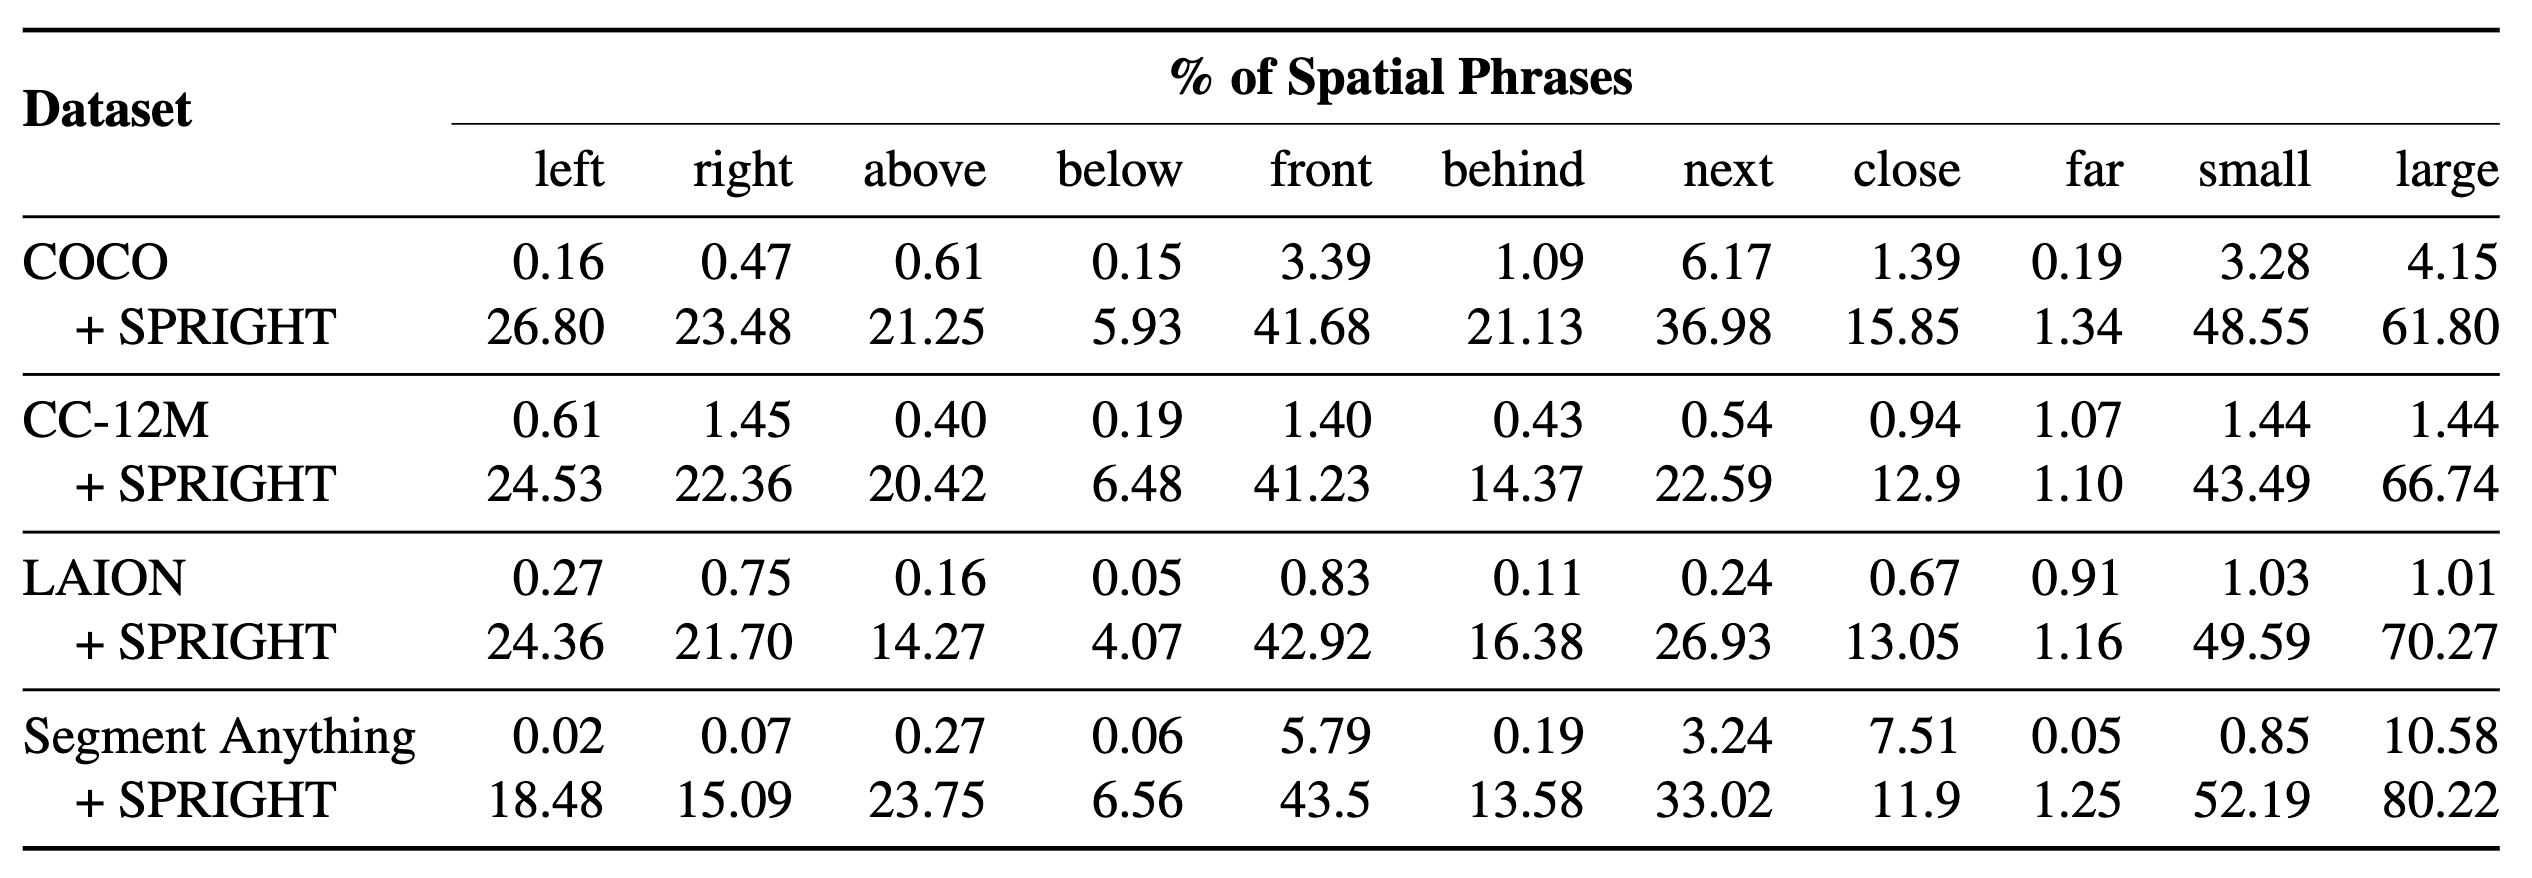 table showing increased occurrence of spatial keywords in SPRIGHT captions